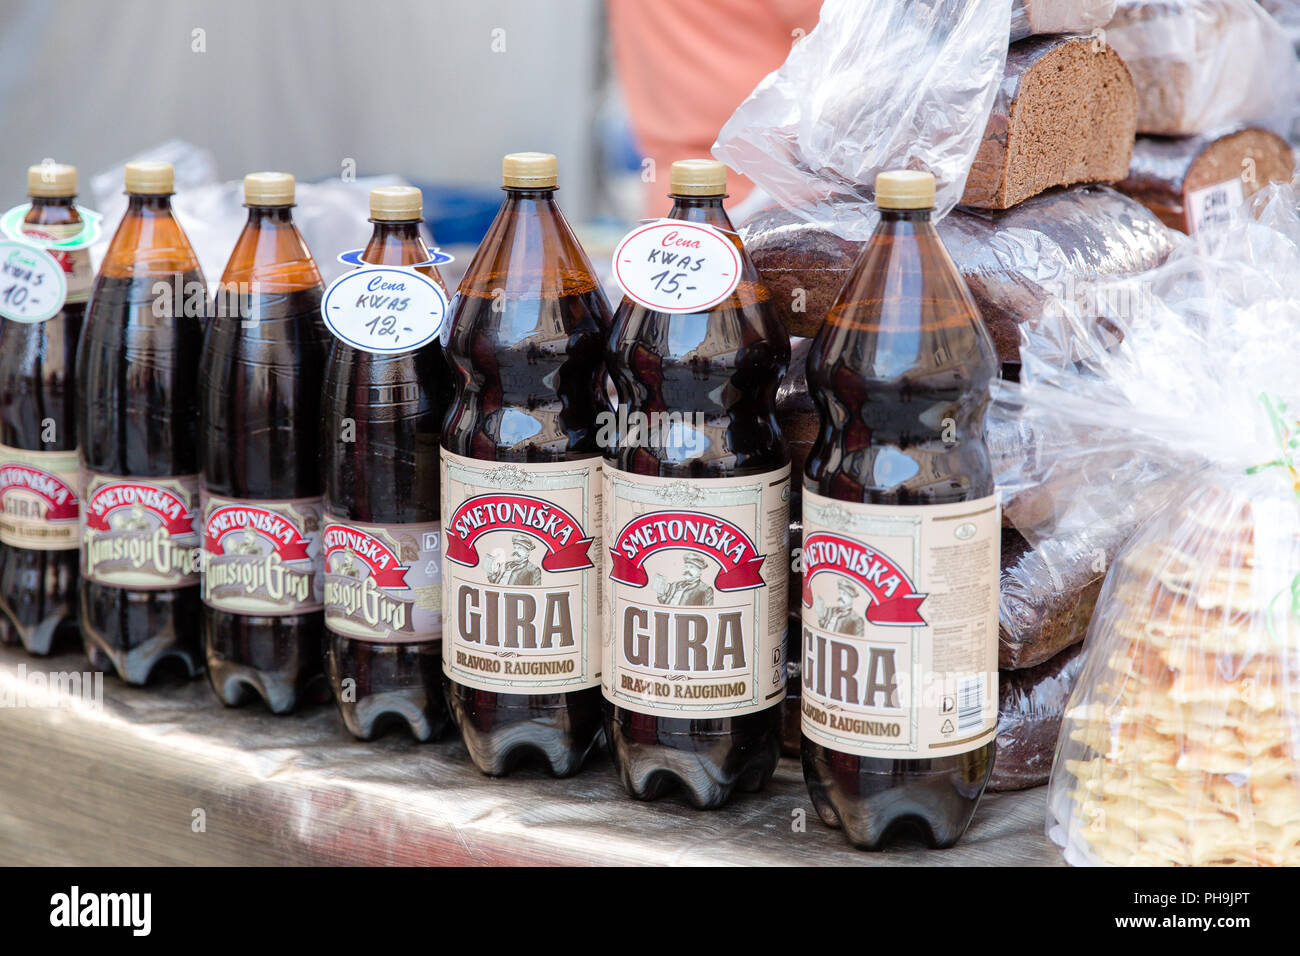 Bottles with Gira Kvass popular Eastern European drink traditional Slavic and Baltic beverage made from black bread at the street market in Poland Stock Photo